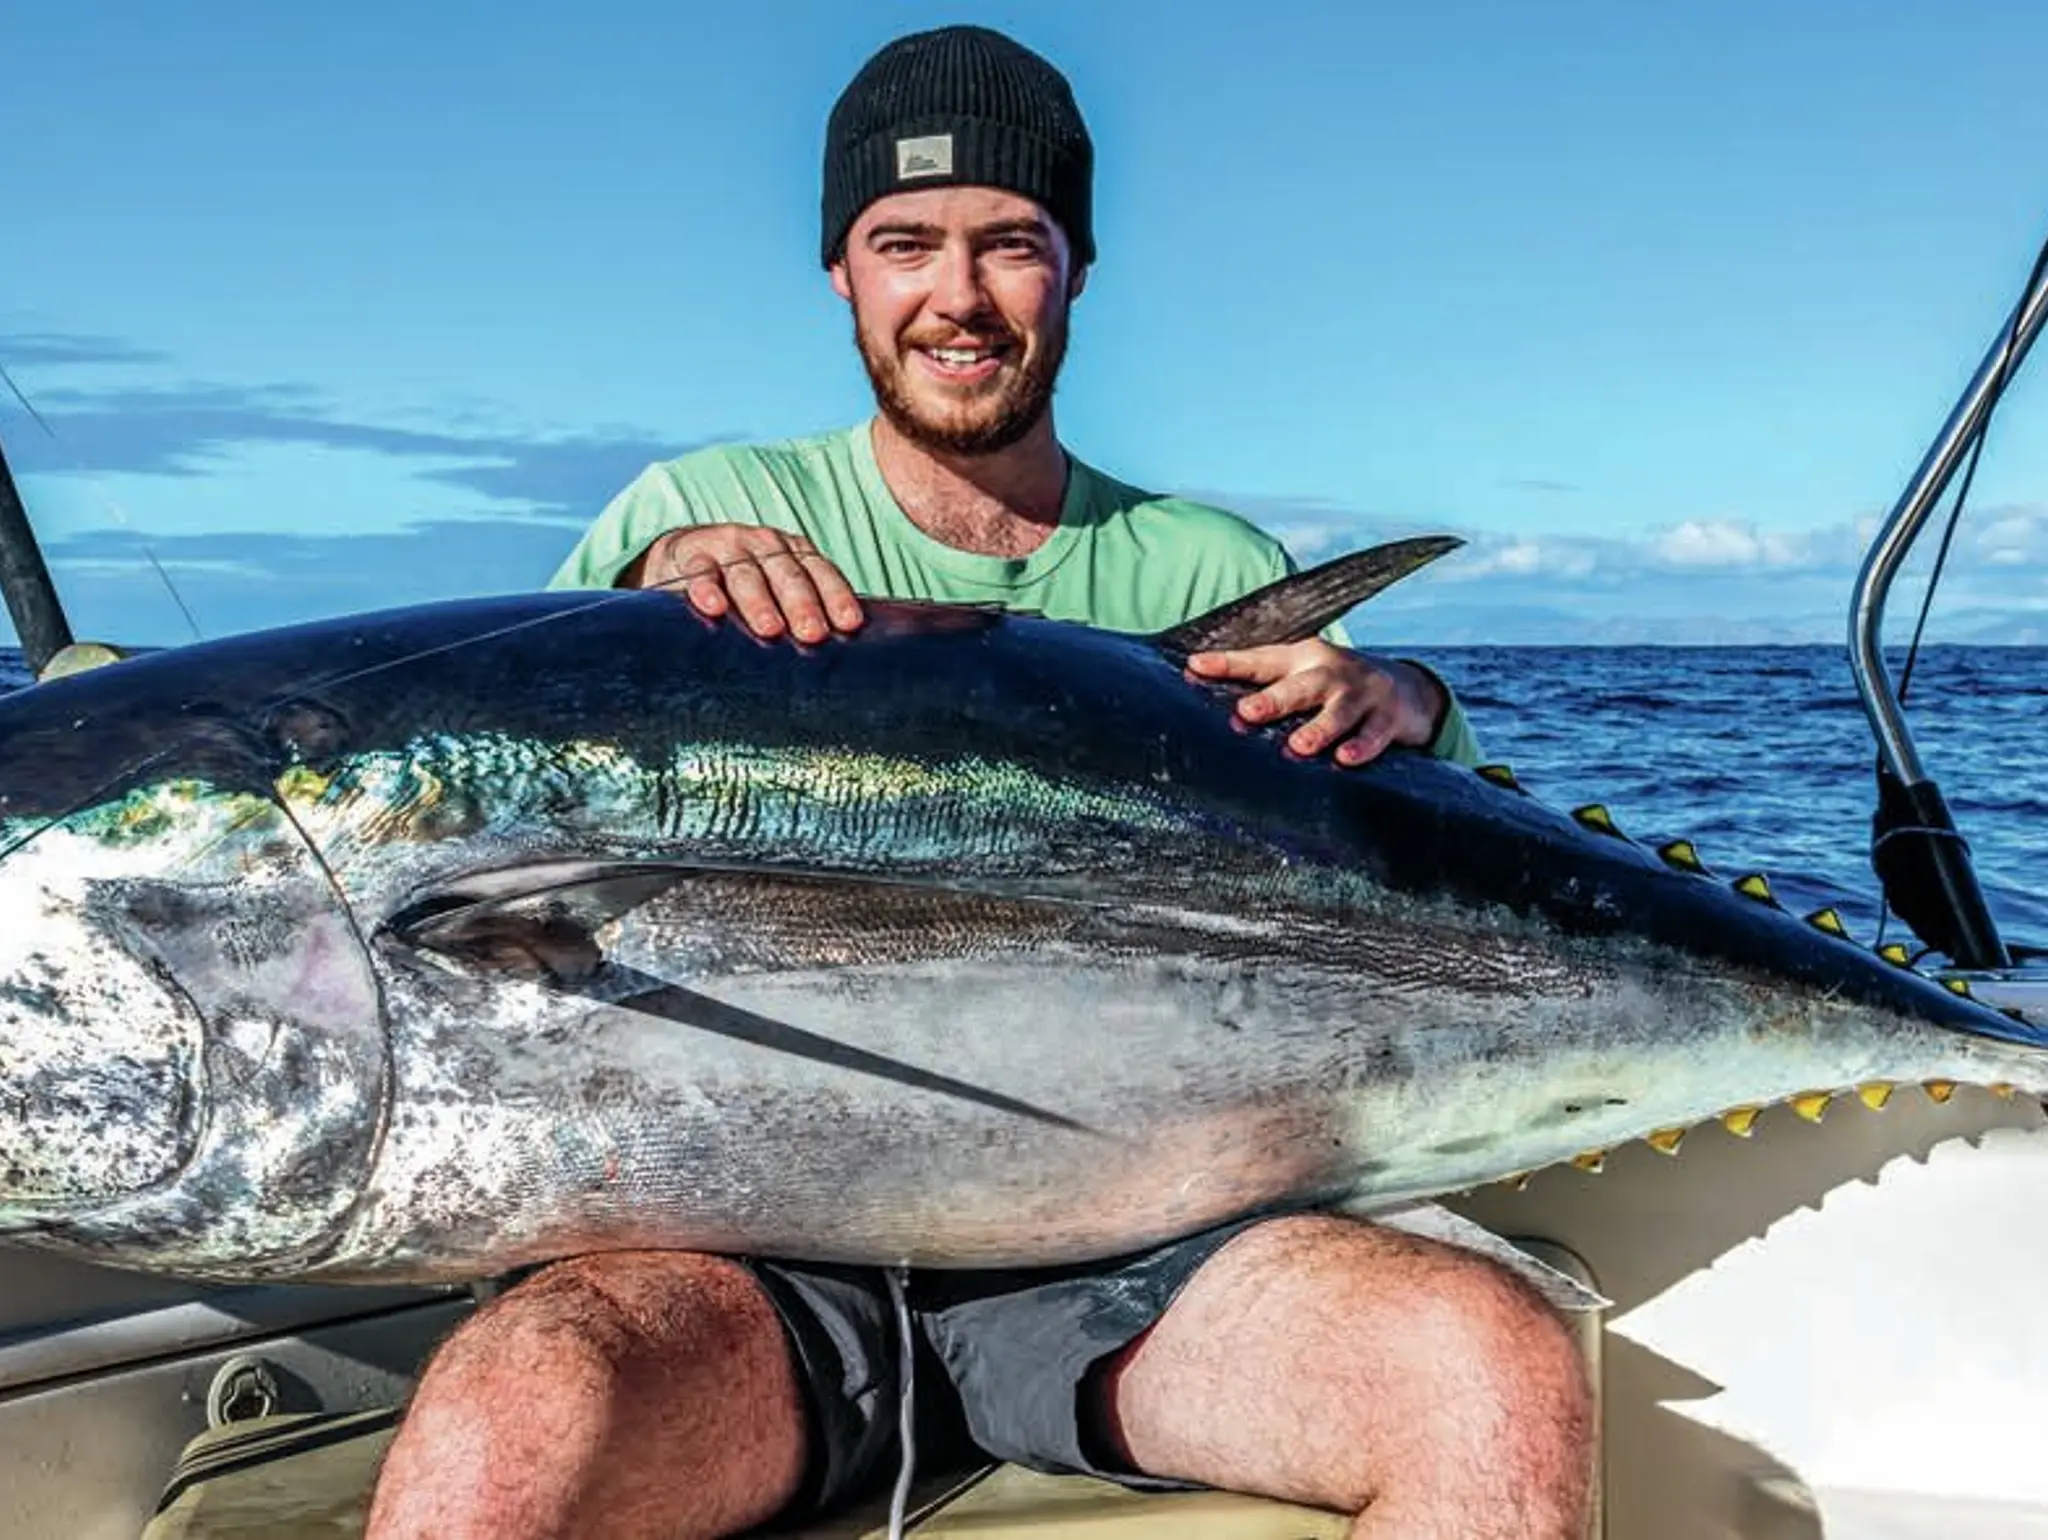 EXPORT HOW TO CATCH SOUTHERN BLUEFIN TUNA